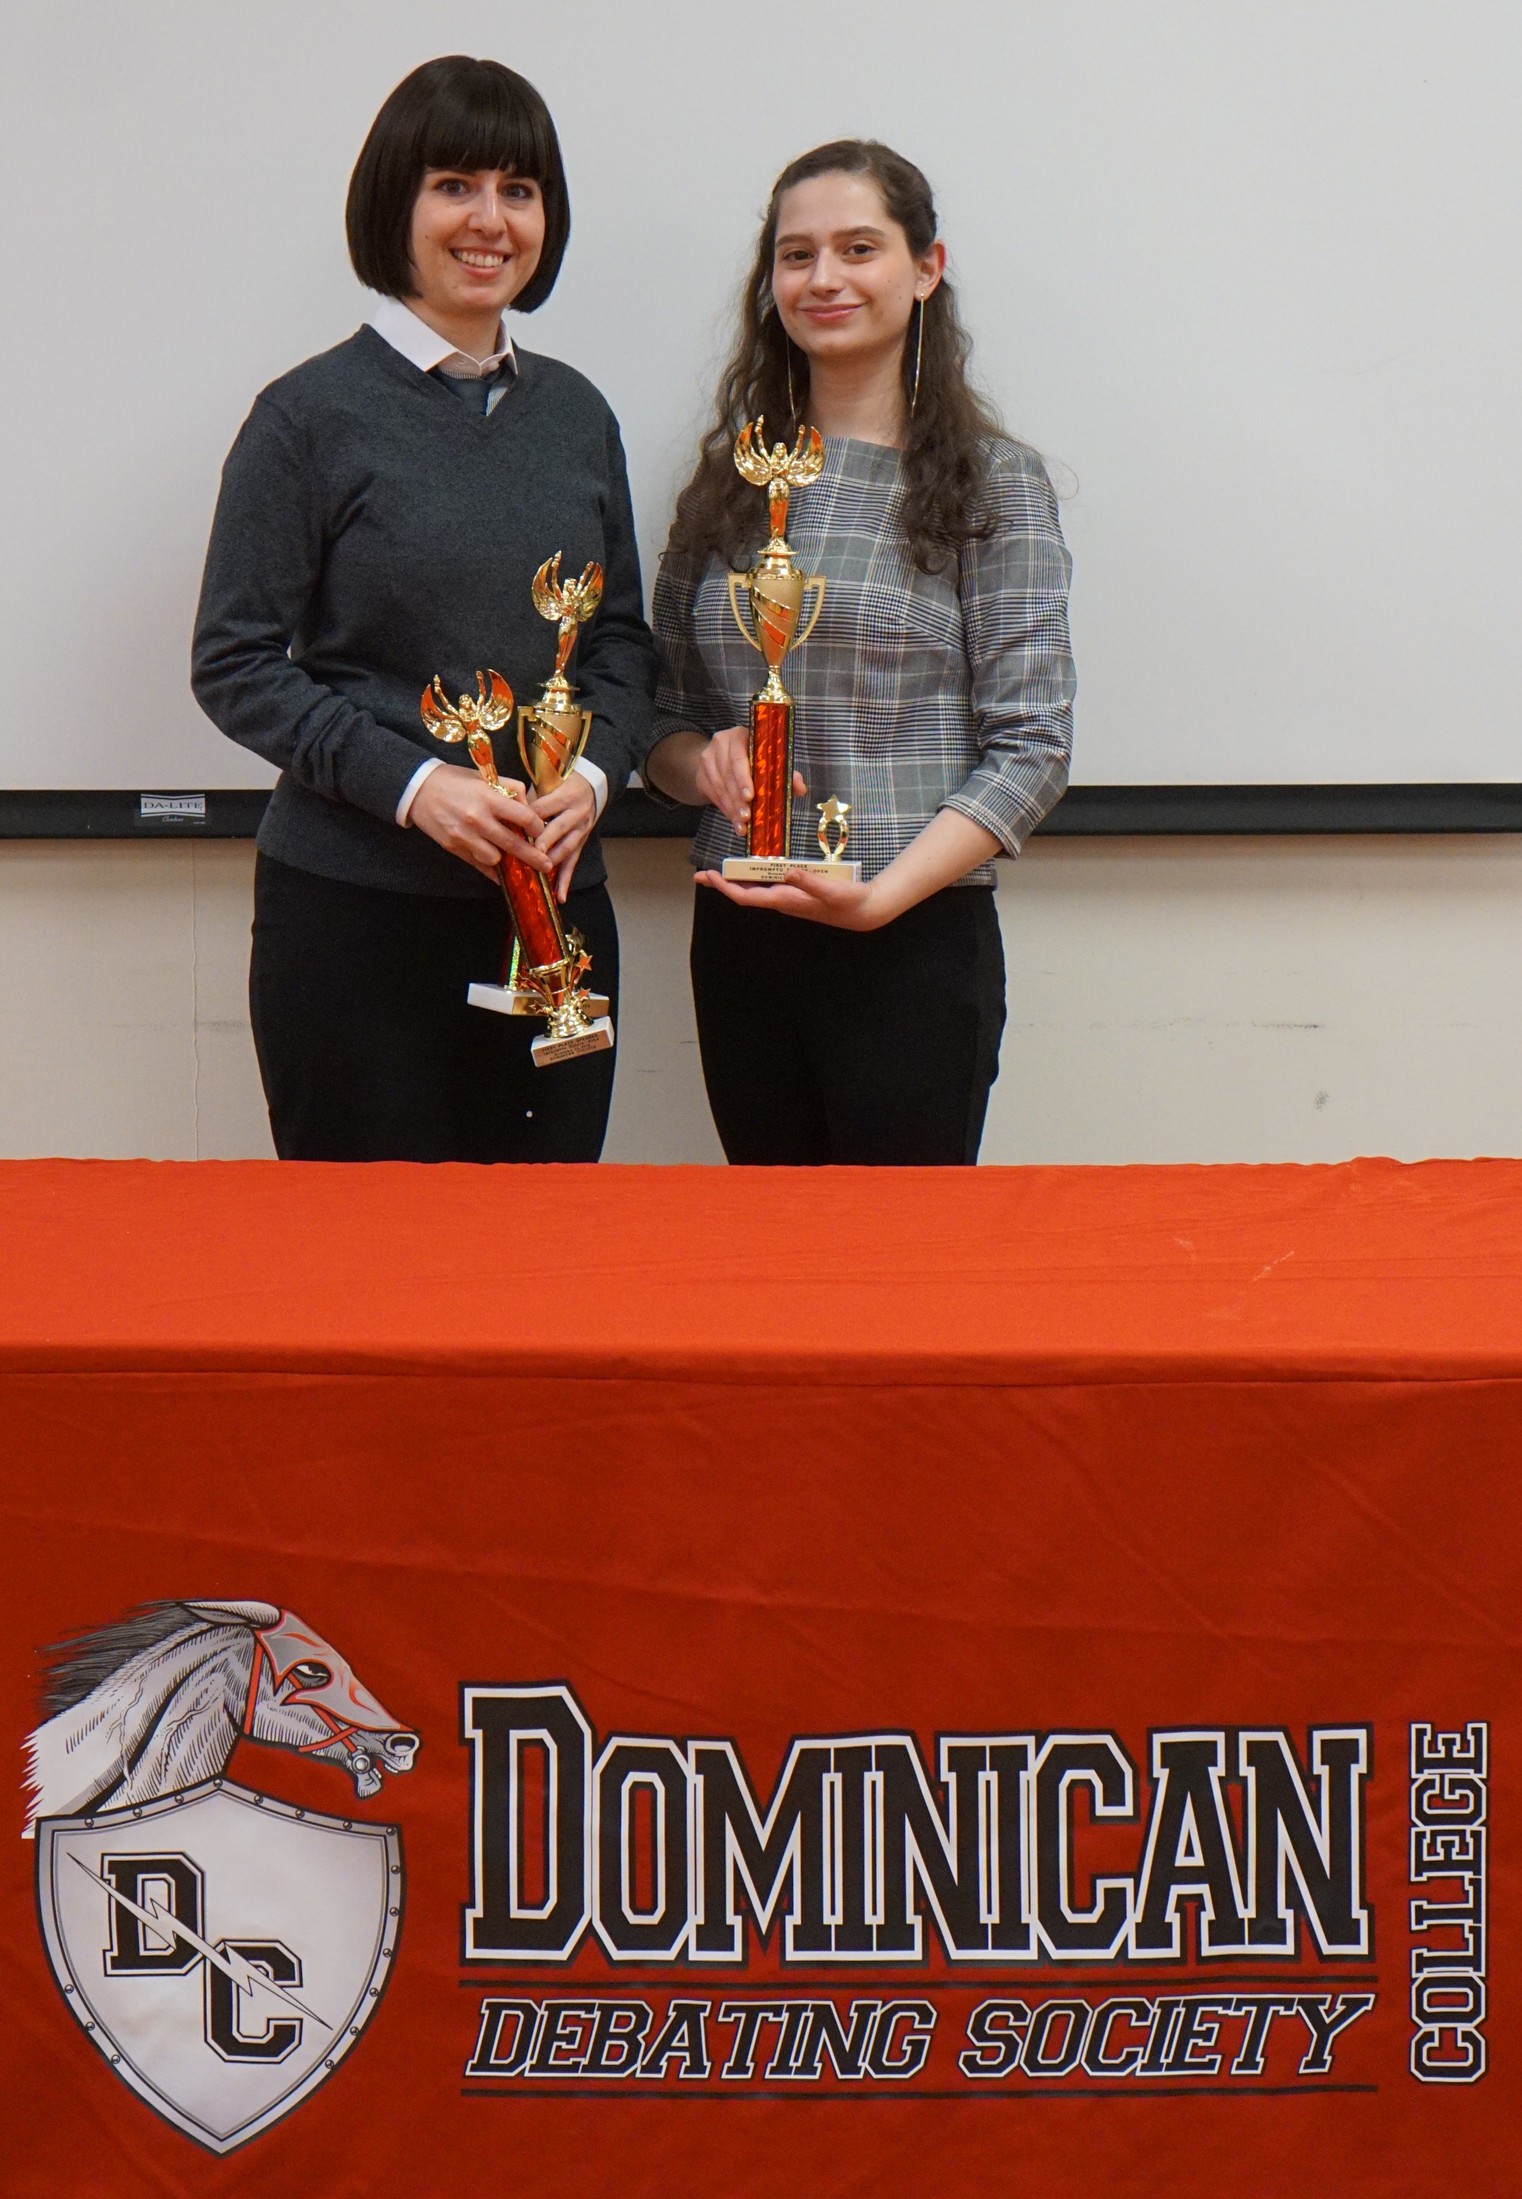 Two RCC Students Take Home Top Prize at First Online Debate in  Rockland Community College History